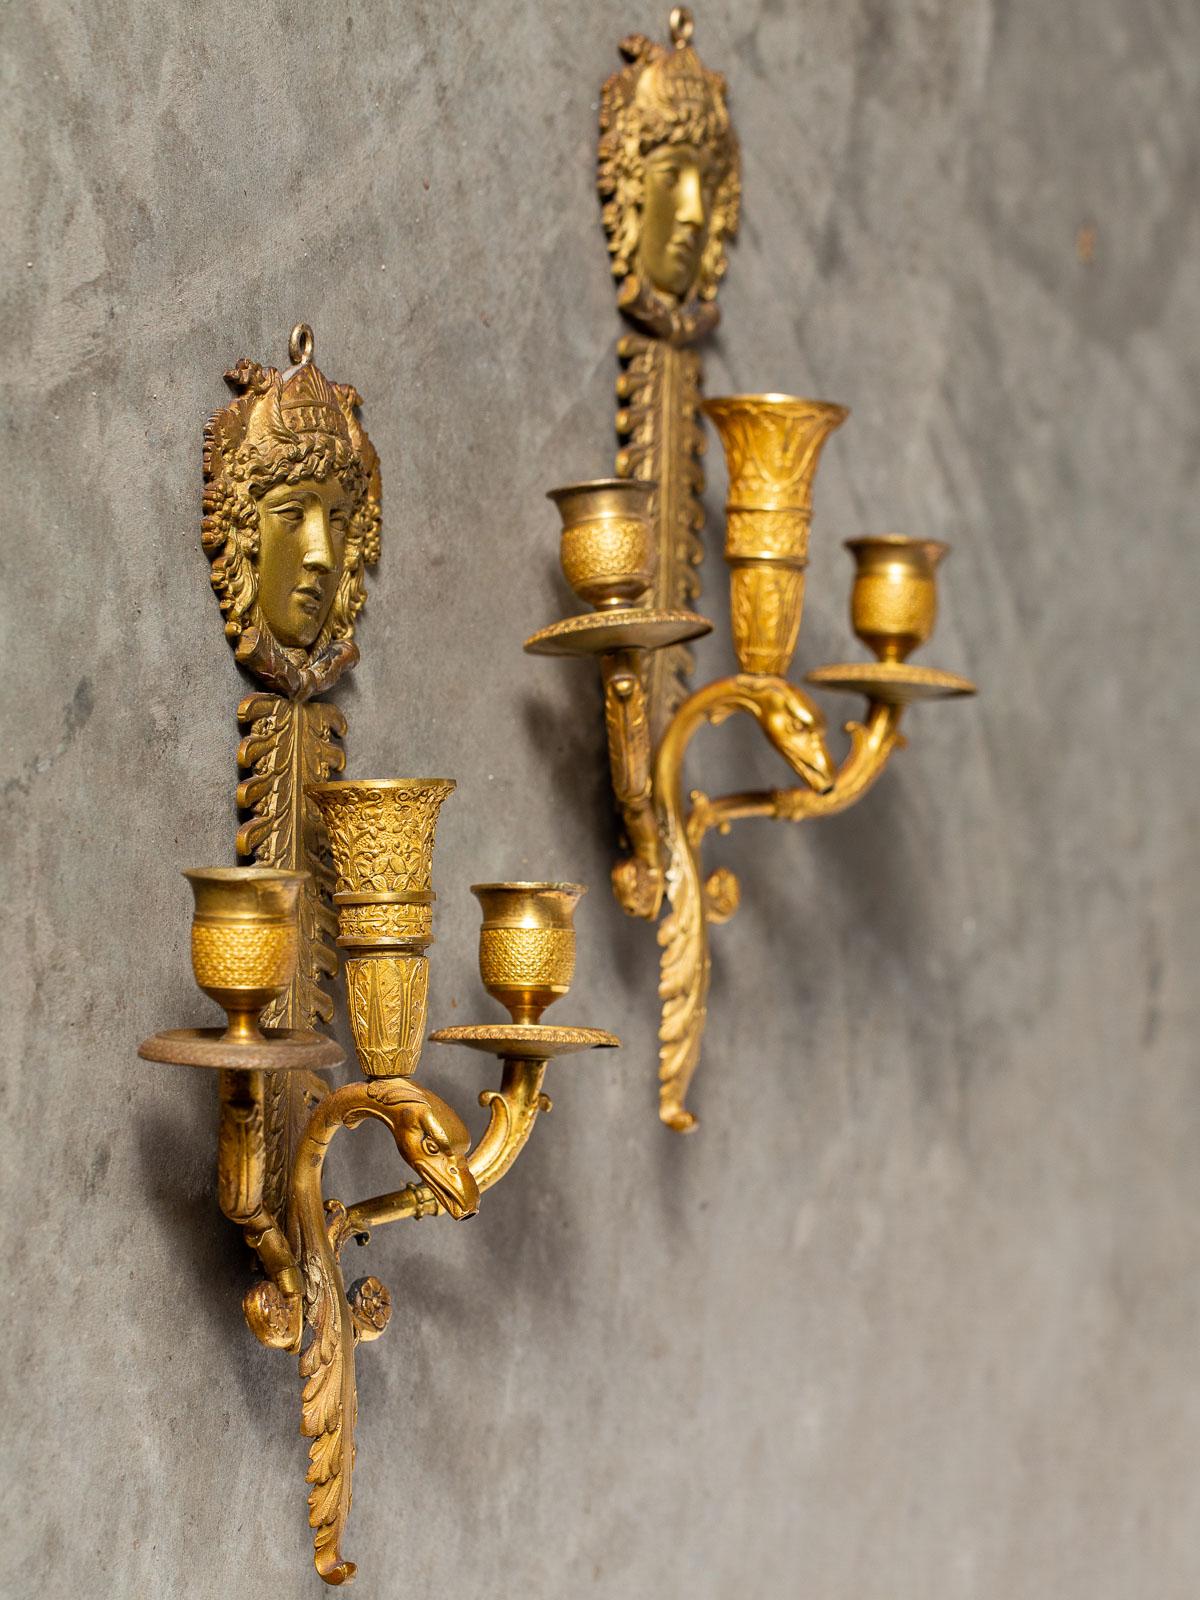 Pair of Neoclassical Antique French Empire Style Gilt Bronze Sconces, circa 1870 For Sale 3